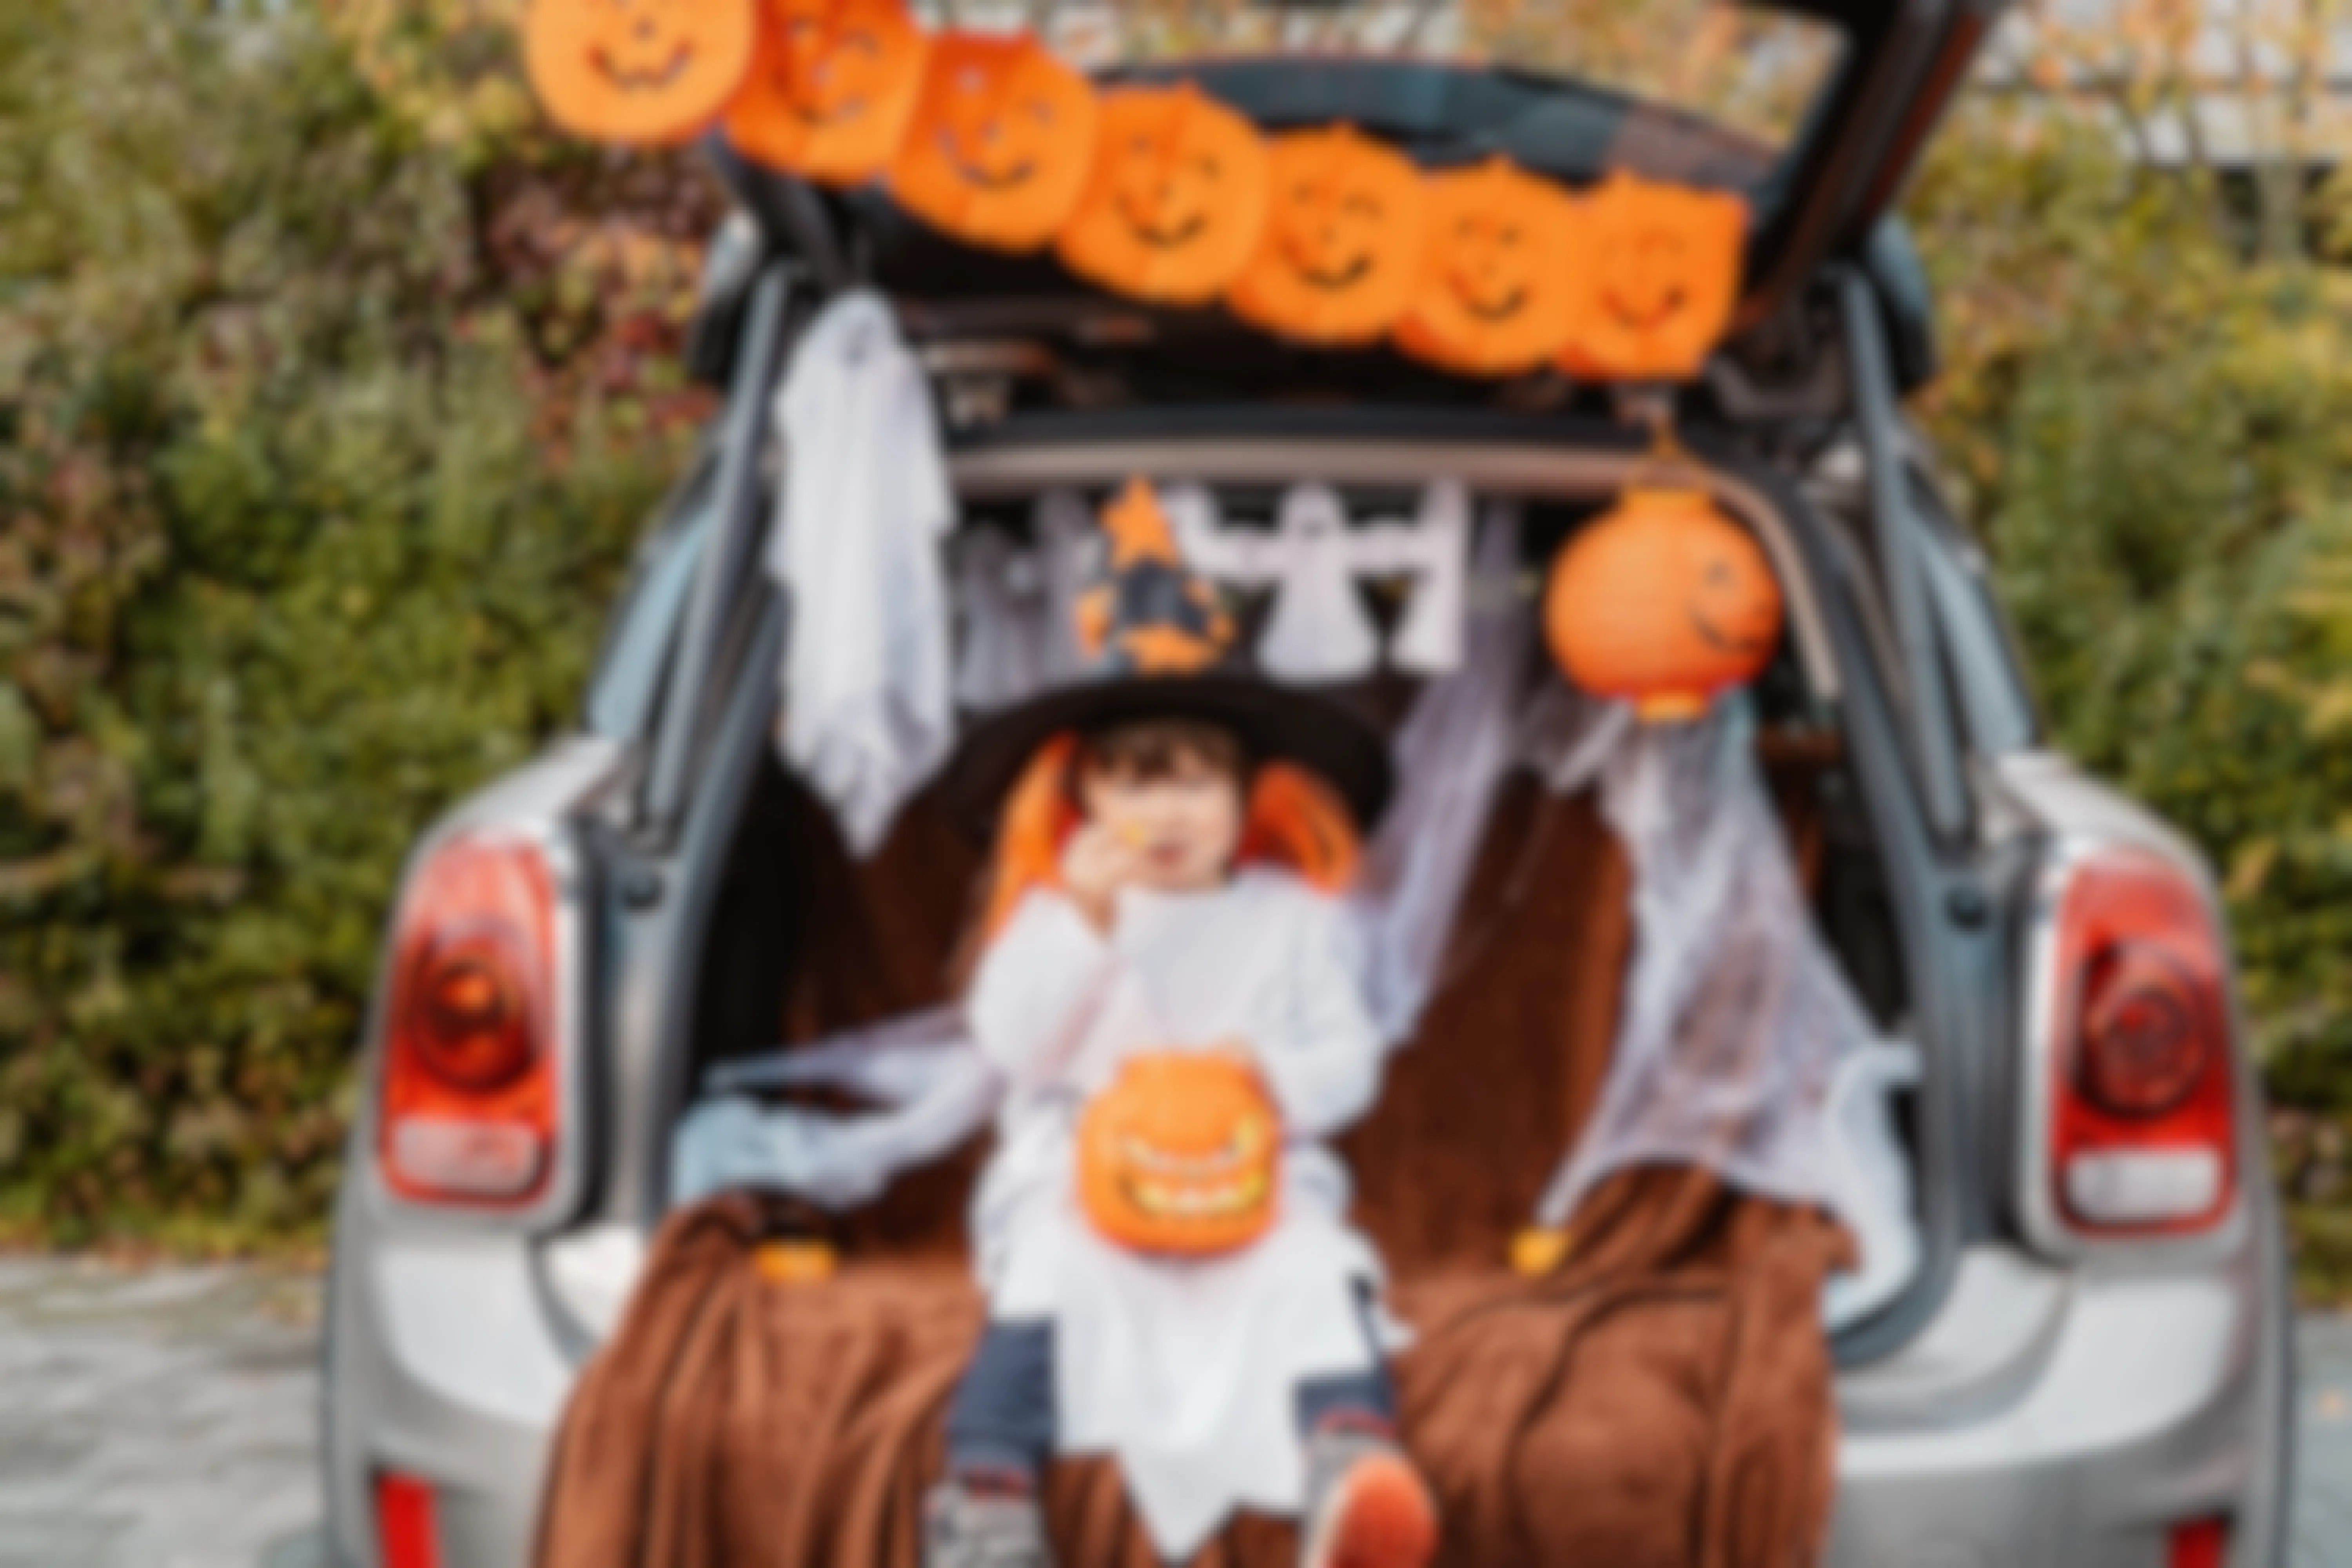 Trick or trunk. Trunk or treat. Little child in witch hat celebrating Halloween party in decorated trunk of car eating candies. New trend and alternative safe outdoor celebration of traditional holiday.